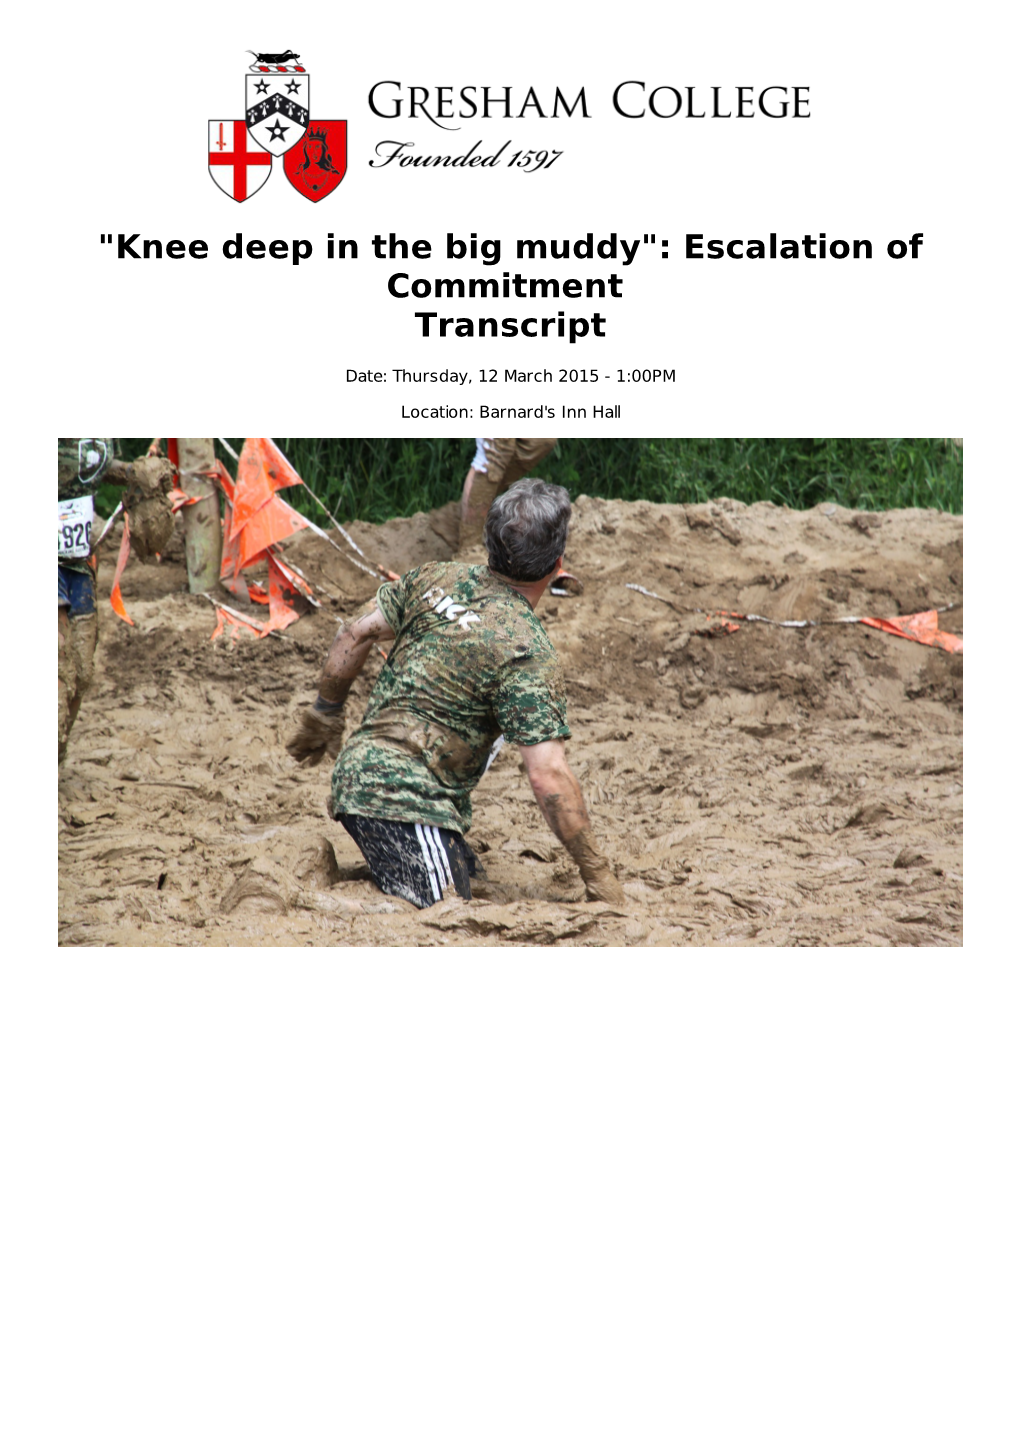 "Knee Deep in the Big Muddy": Escalation of Commitment Transcript